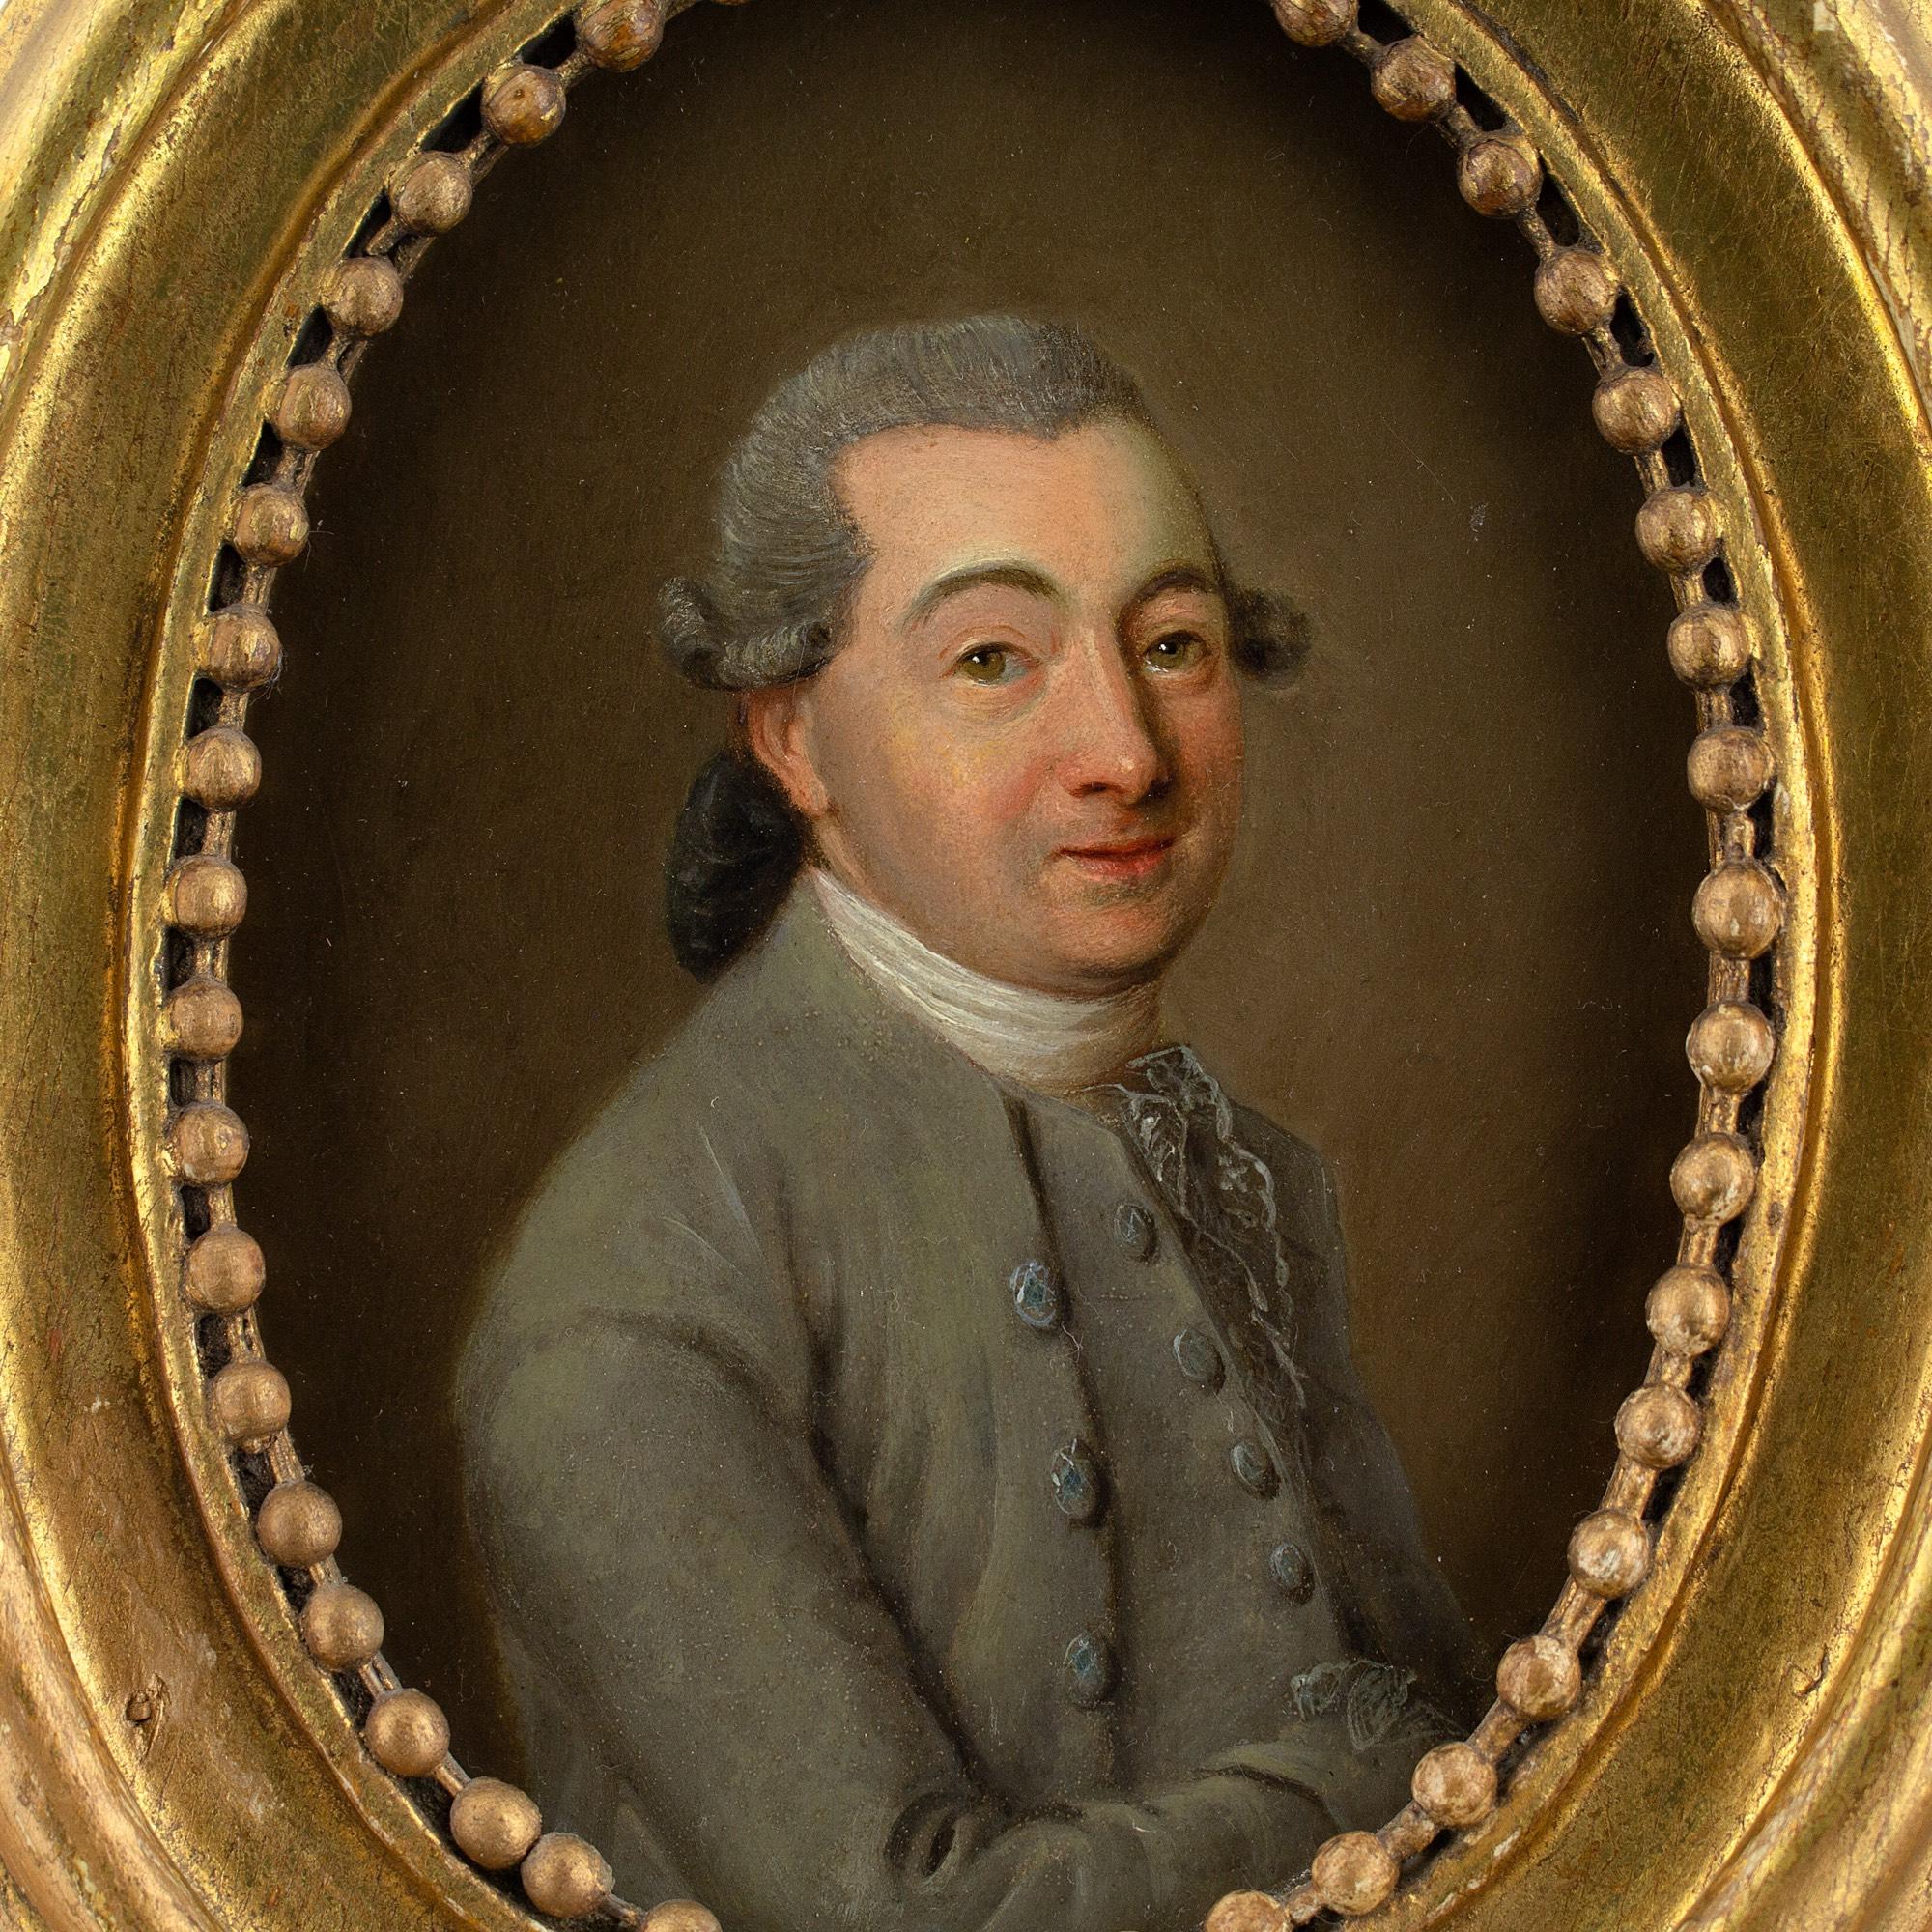 This charming mid-18th-century oval Danish portrait miniature depicts a good-humoured gentleman dressed in a three-piece suit with white stock.

Engaging, alive and natural, he’s presenting the image of an enlightened soul. Dodging the trappings of